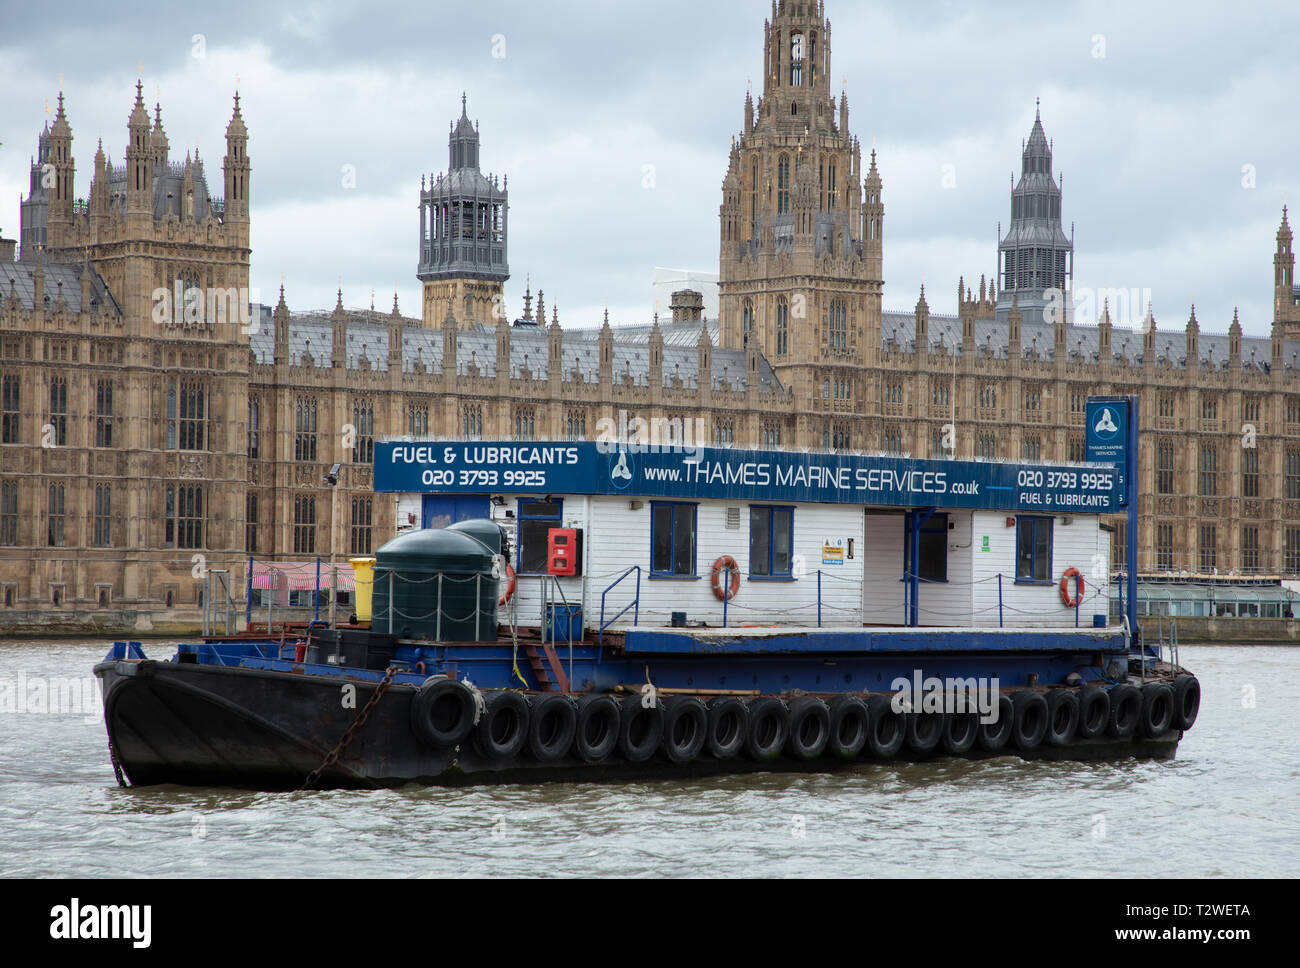 https://c8.alamy.com/comp/T2WETA/large-service-boat-supplies-fuel-and-lubricants-to-vessels-navigating-the-river-thames-is-permanently-moored-near-parliament-westminster-london-T2WETA.jpg